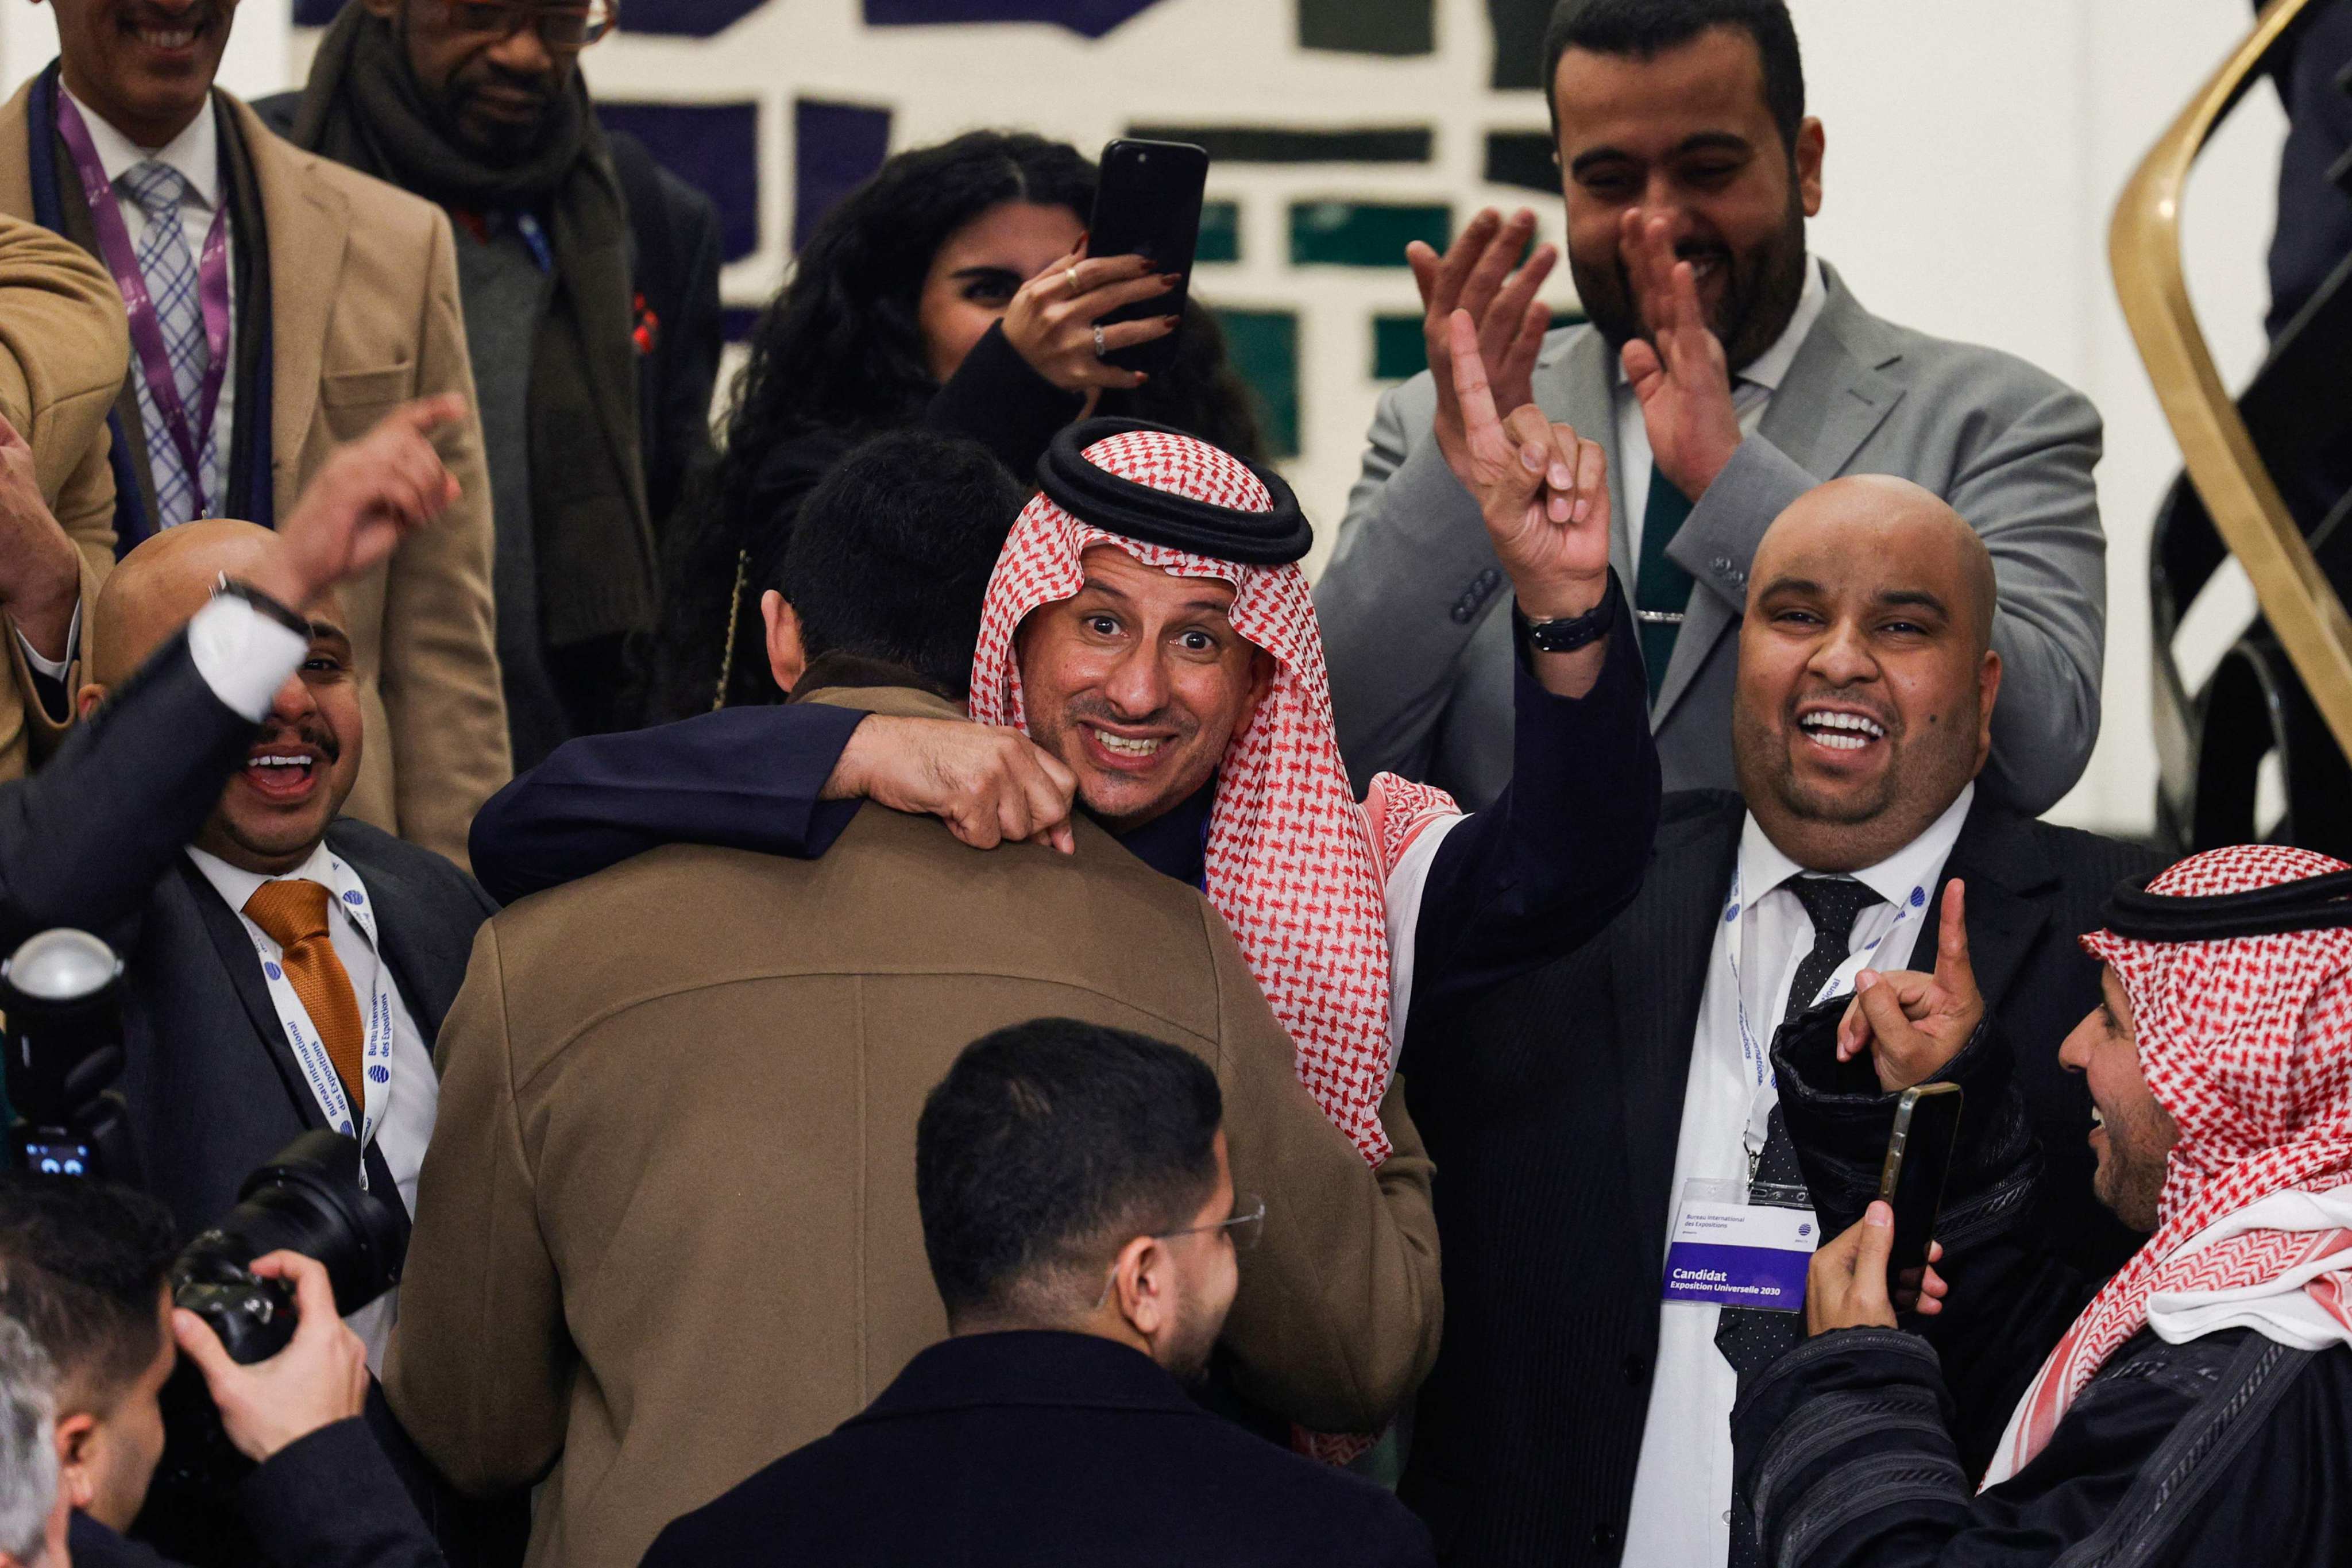 Members of Saudi Arabia’s Royal Commission for Riyadh City celebrate at the Palais des Congres in Issy-les-Moulineaux on Wednesday after winning the bid to host the 2030 World Expo. Photo: AFP